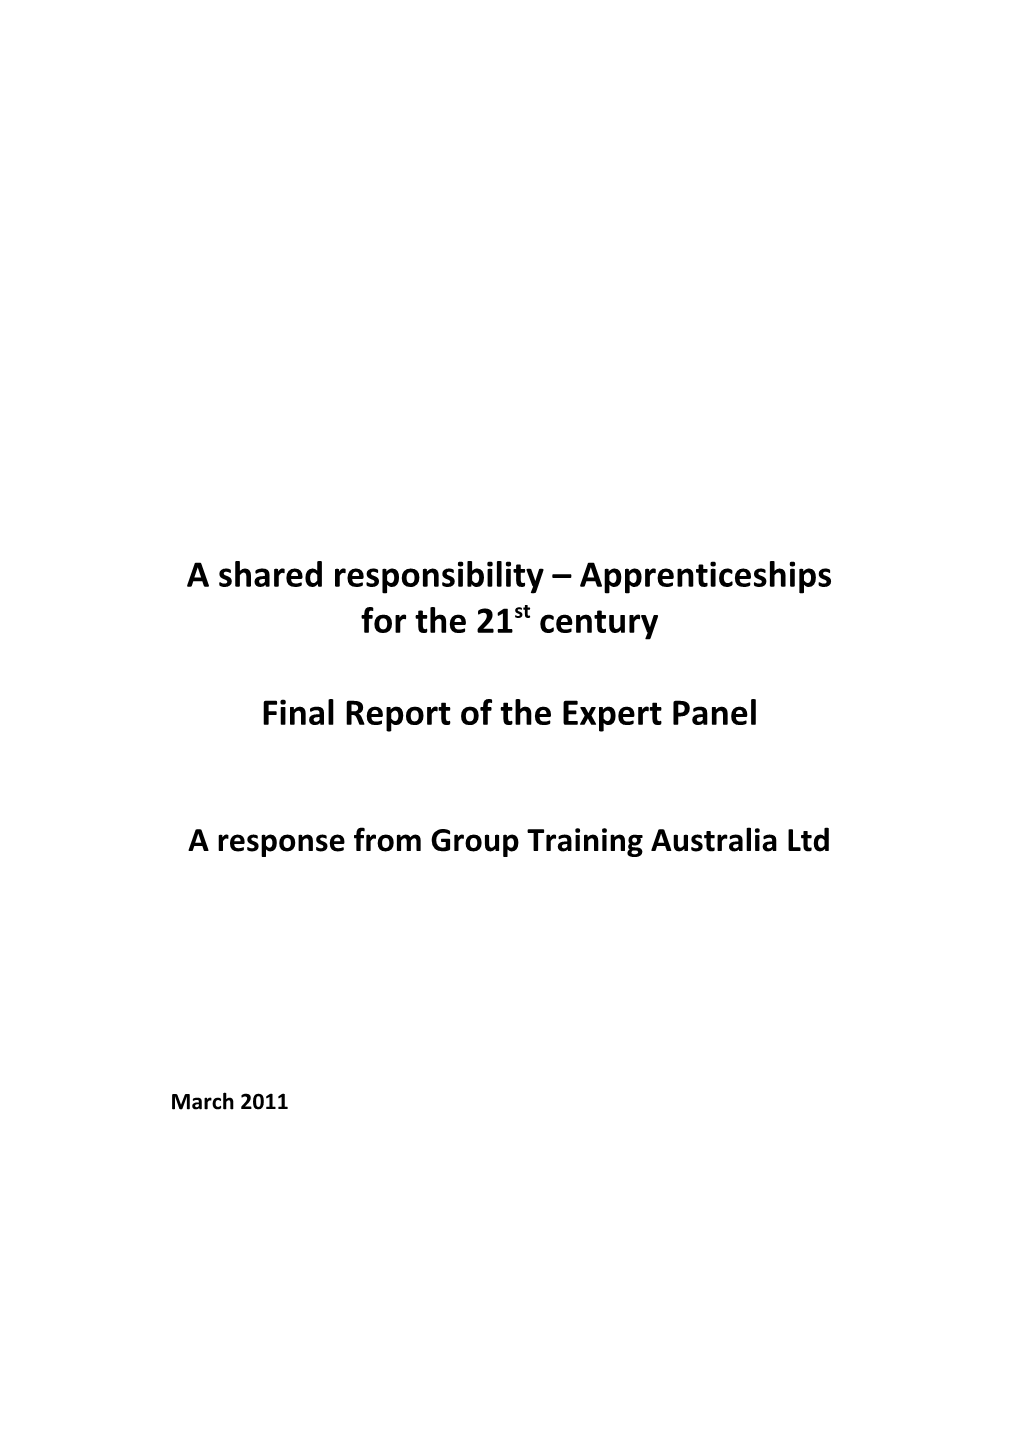 A Shared Responsibility Apprenticeships for the 21St Century